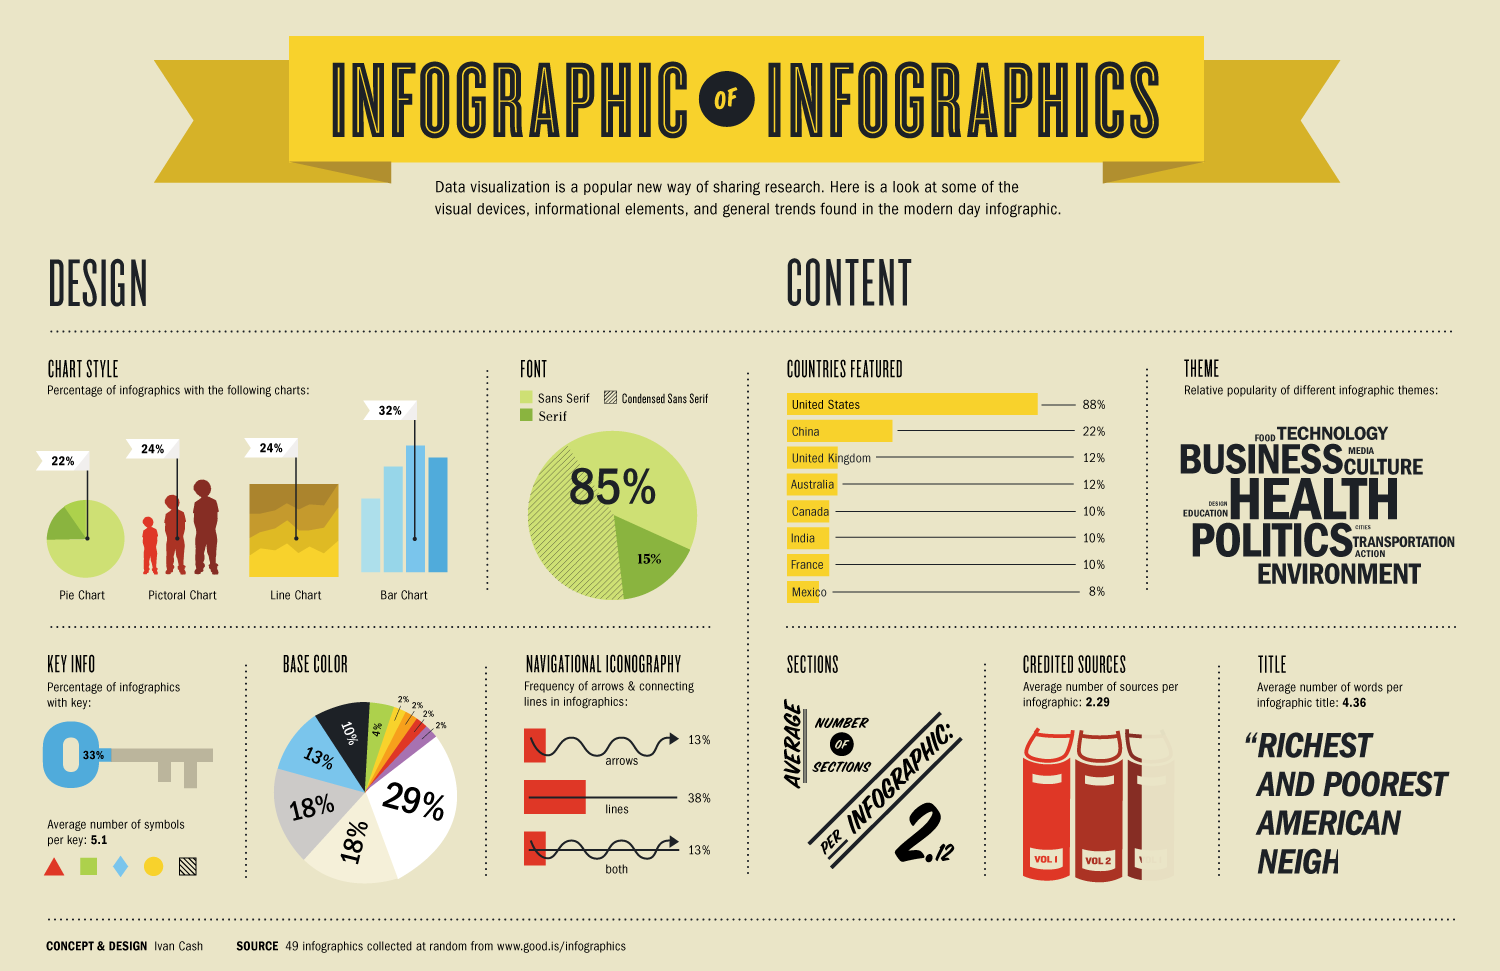 Infographic Overload: An Infographic About Infographics